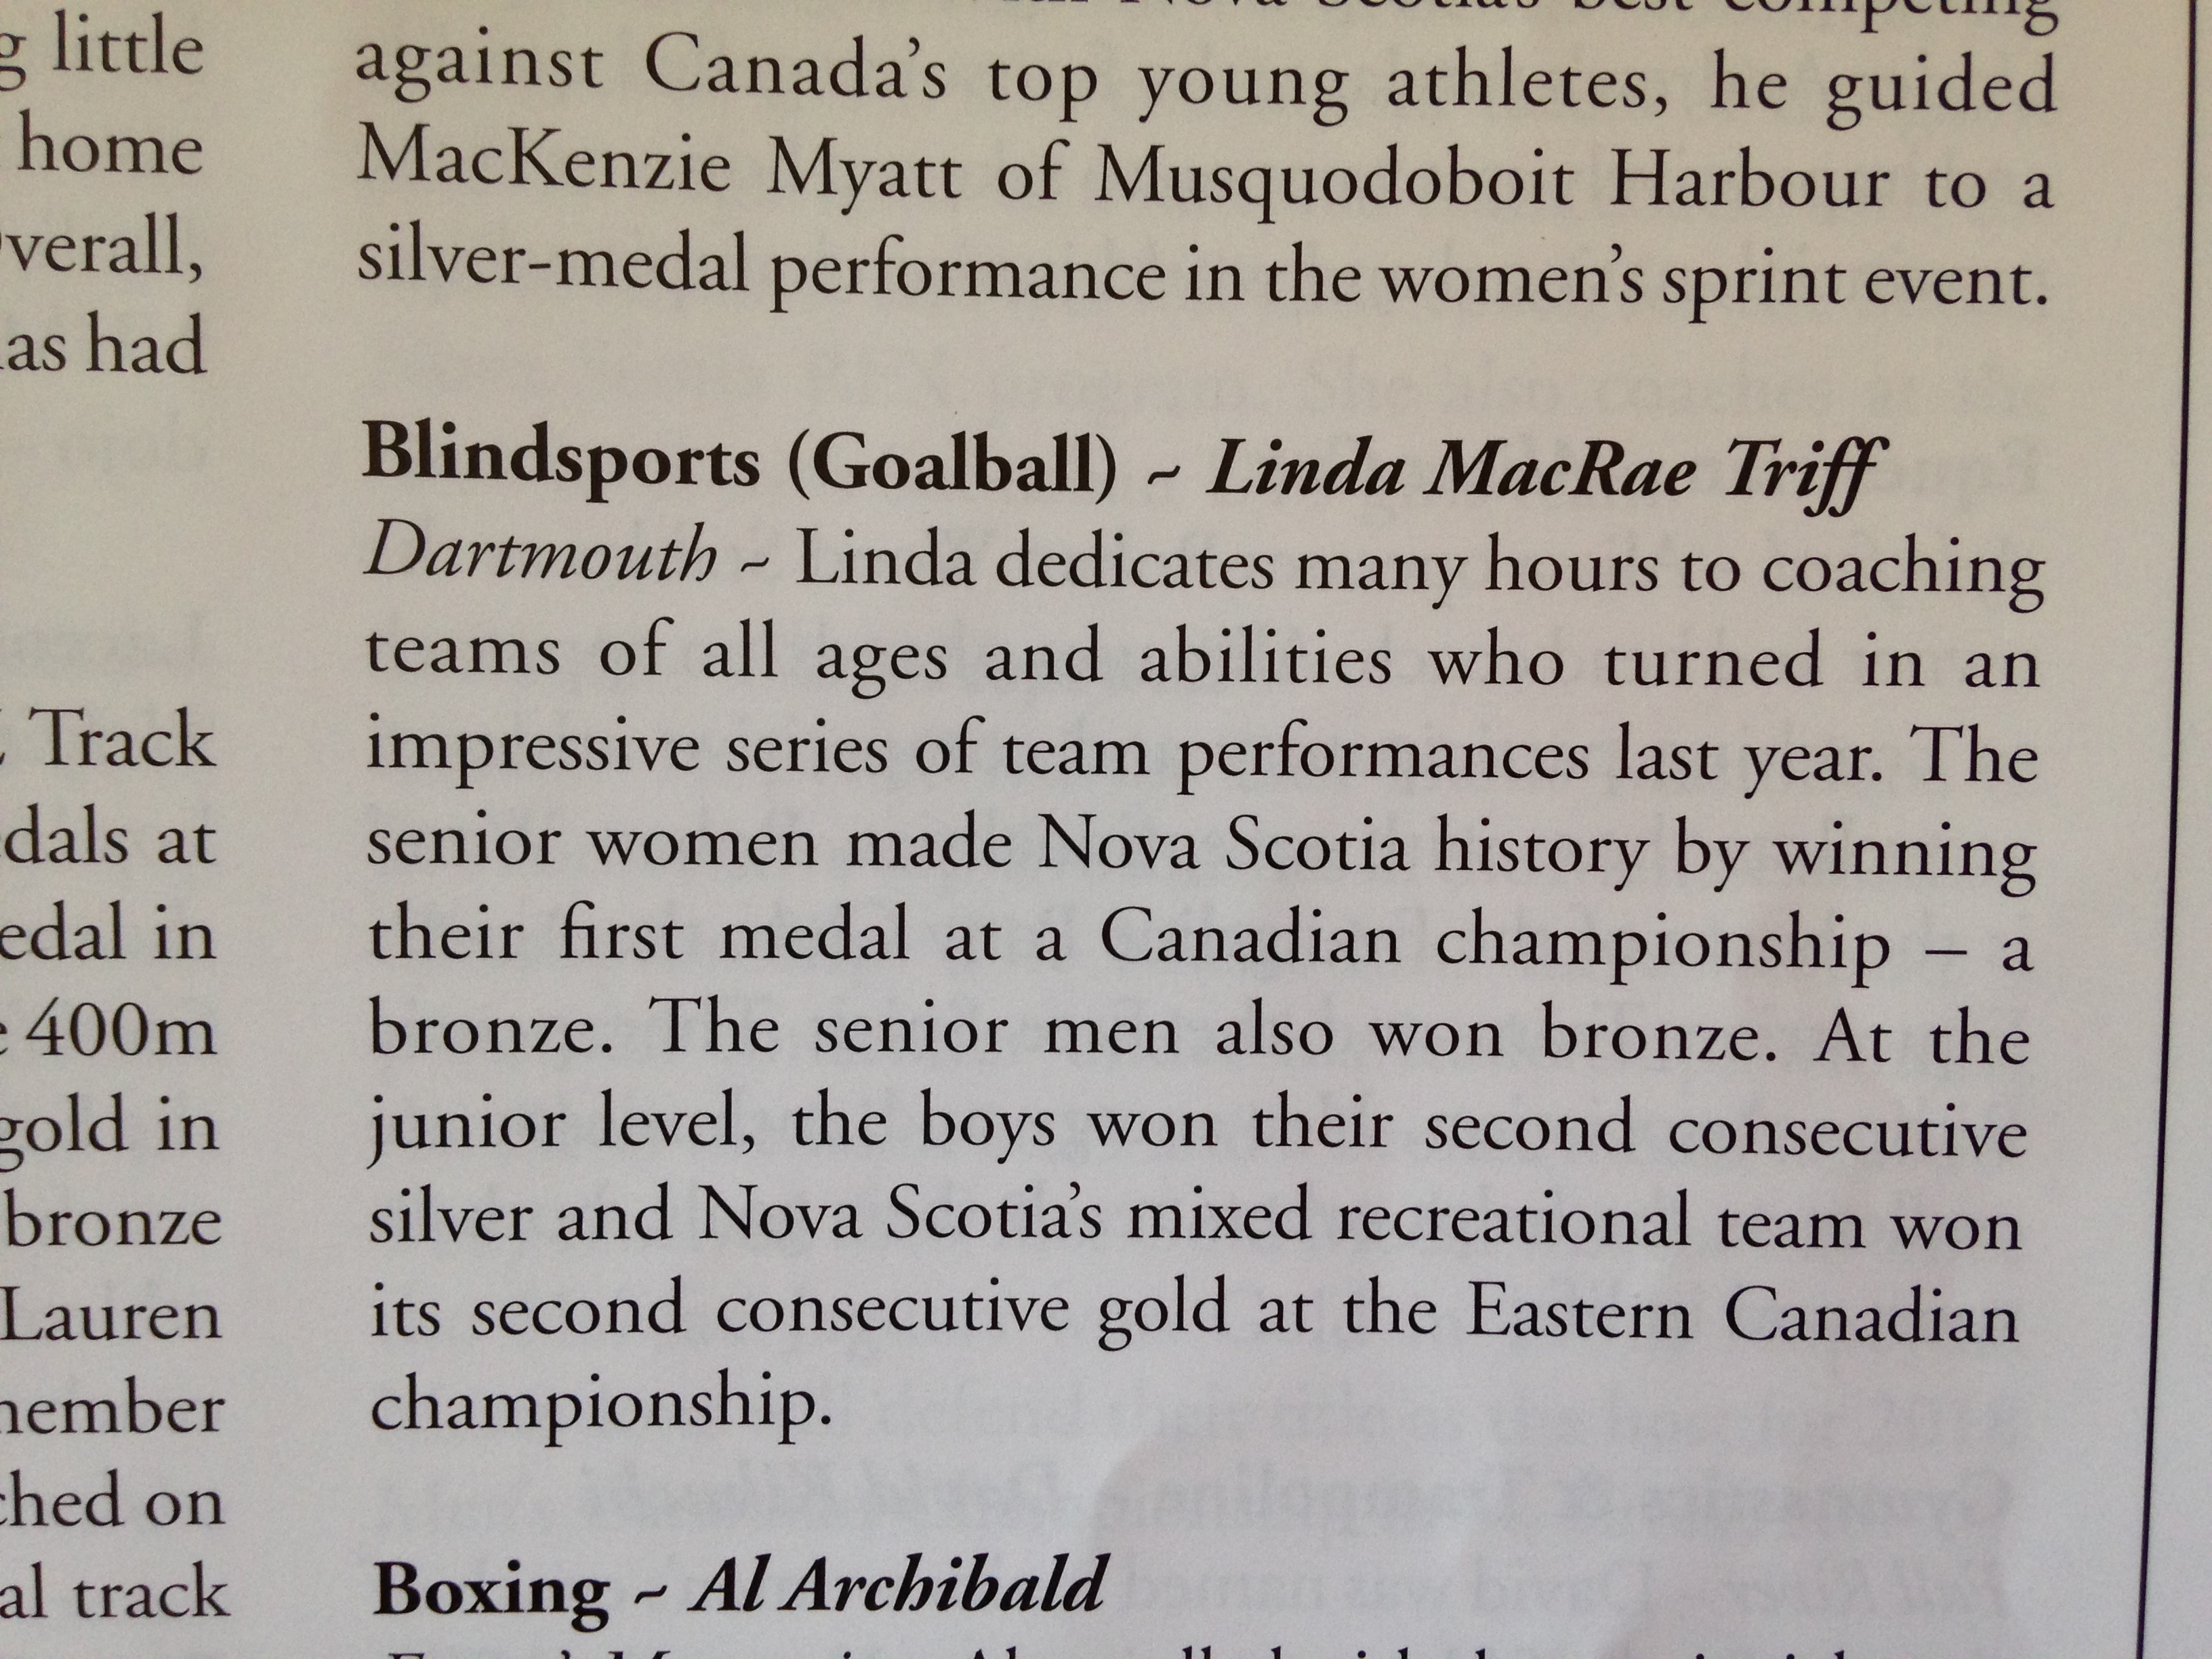 Linda dedicates many hours to coaching teams of all ages and abilities who turned in an impressive series of team performances last year. The senior women mande Nova Scotia history by winning their first medal at a Canadian championship - a bronze. The senior men also won bronze. At the junior level, the boys on their second consecutive silver and Nova Scotia's mixed recreational team won its second consecutive gold at the Eastern Canadian championship. 